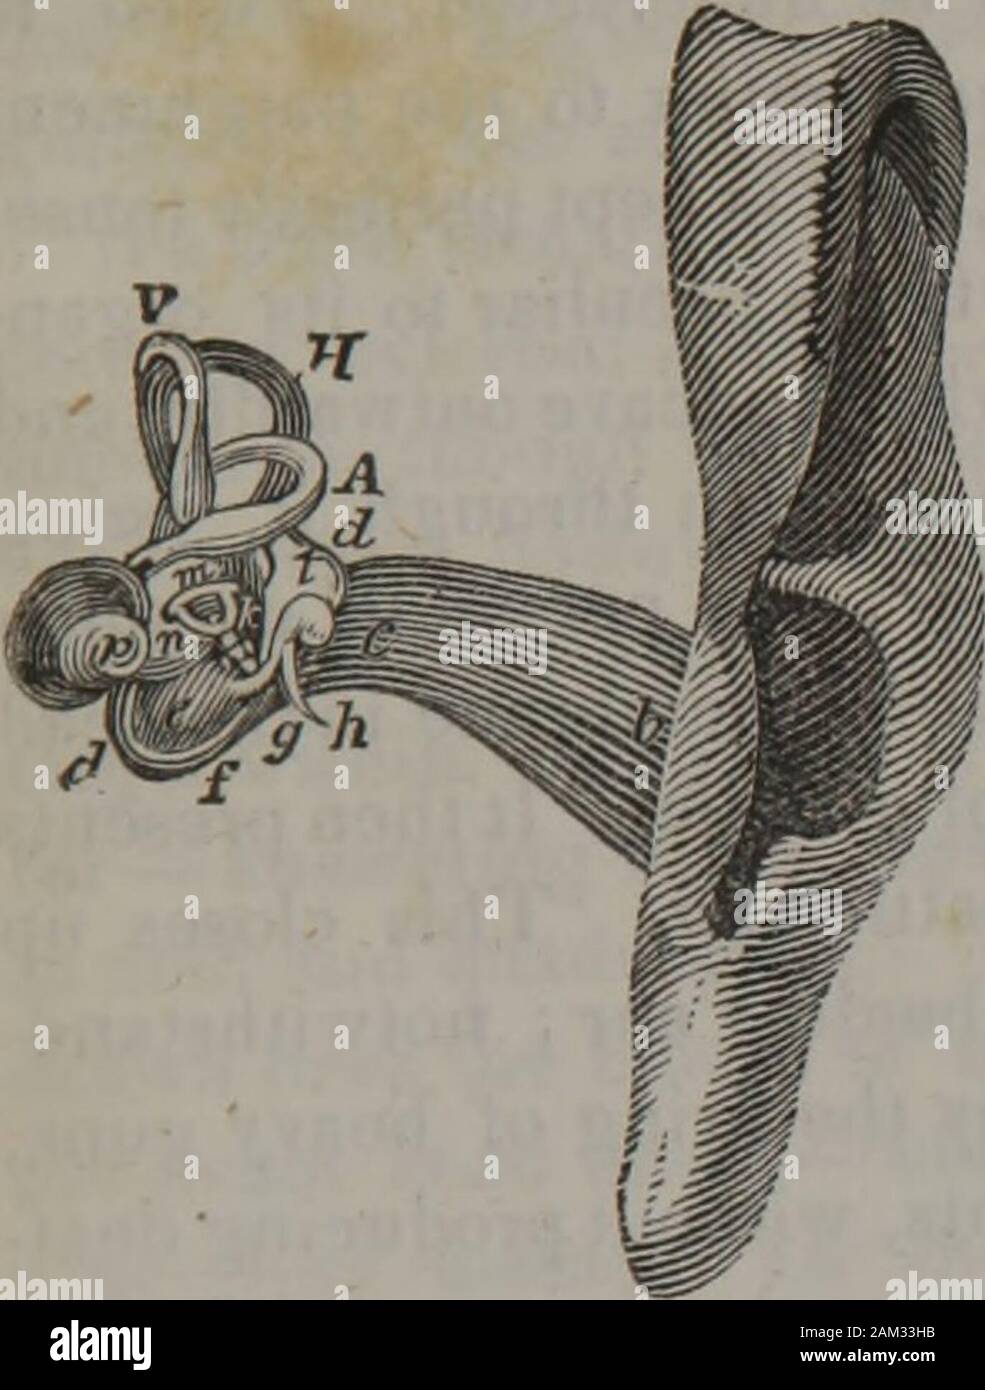 The class-book of anatomy : designed for schools, explanatory of the first principles of human mechanism, as the basis of physical education . rt hairs, intersecting eachother in such a manner, that an insect must overcome theresistance of those pikes, or chevaux de frise, in case thewax t does not arrest its progress, before reaching the *Ear wax is certain death to insects that feed upon it; though itscomposition is such, that they cannot restrain their appetites whenpent up where it is. Naturalists have taken a hint from this, toprevent the depredations of vermin on dried preparations in ca Stock Photo